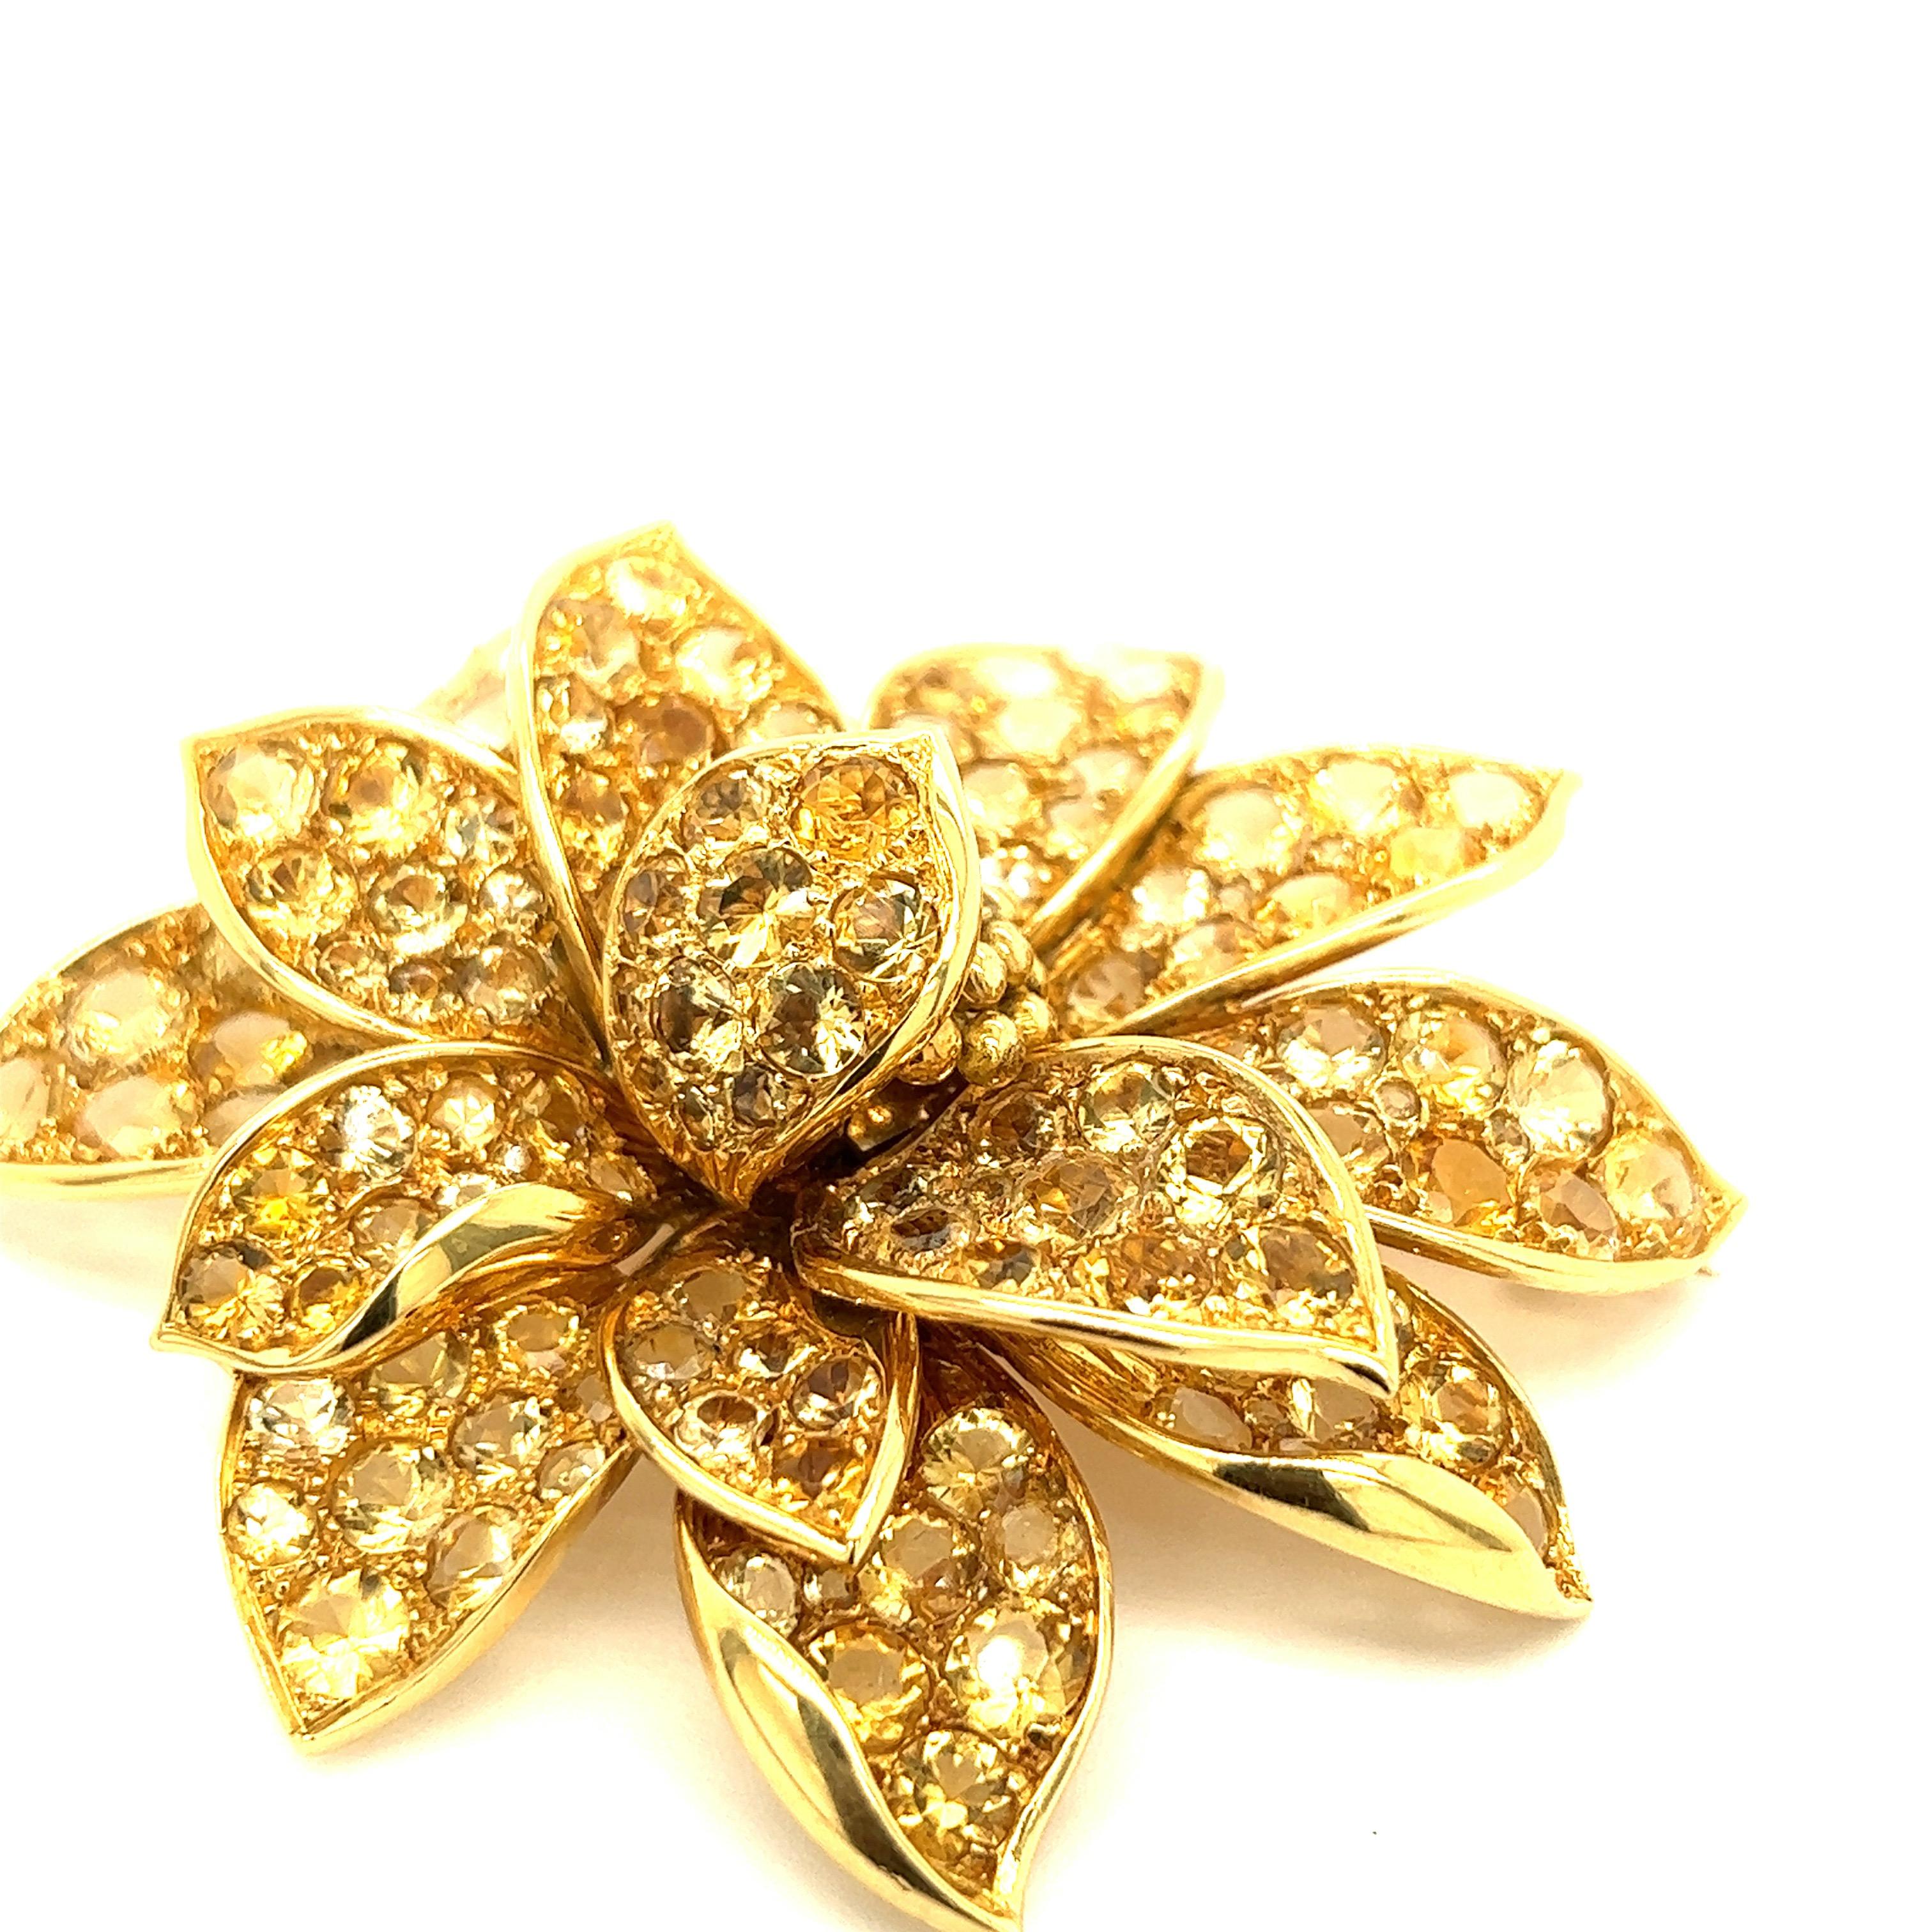 Voirin Sonrel for René Boivin Heliodor Yellow Gold Brooch

A beautiful flower made of 18 karat yellow gold, featuring pavé-set circular-cut heliodors and a beaded gold center; signed with maker's mark for Voirin Sonrel (faded)

Size: width 2.38